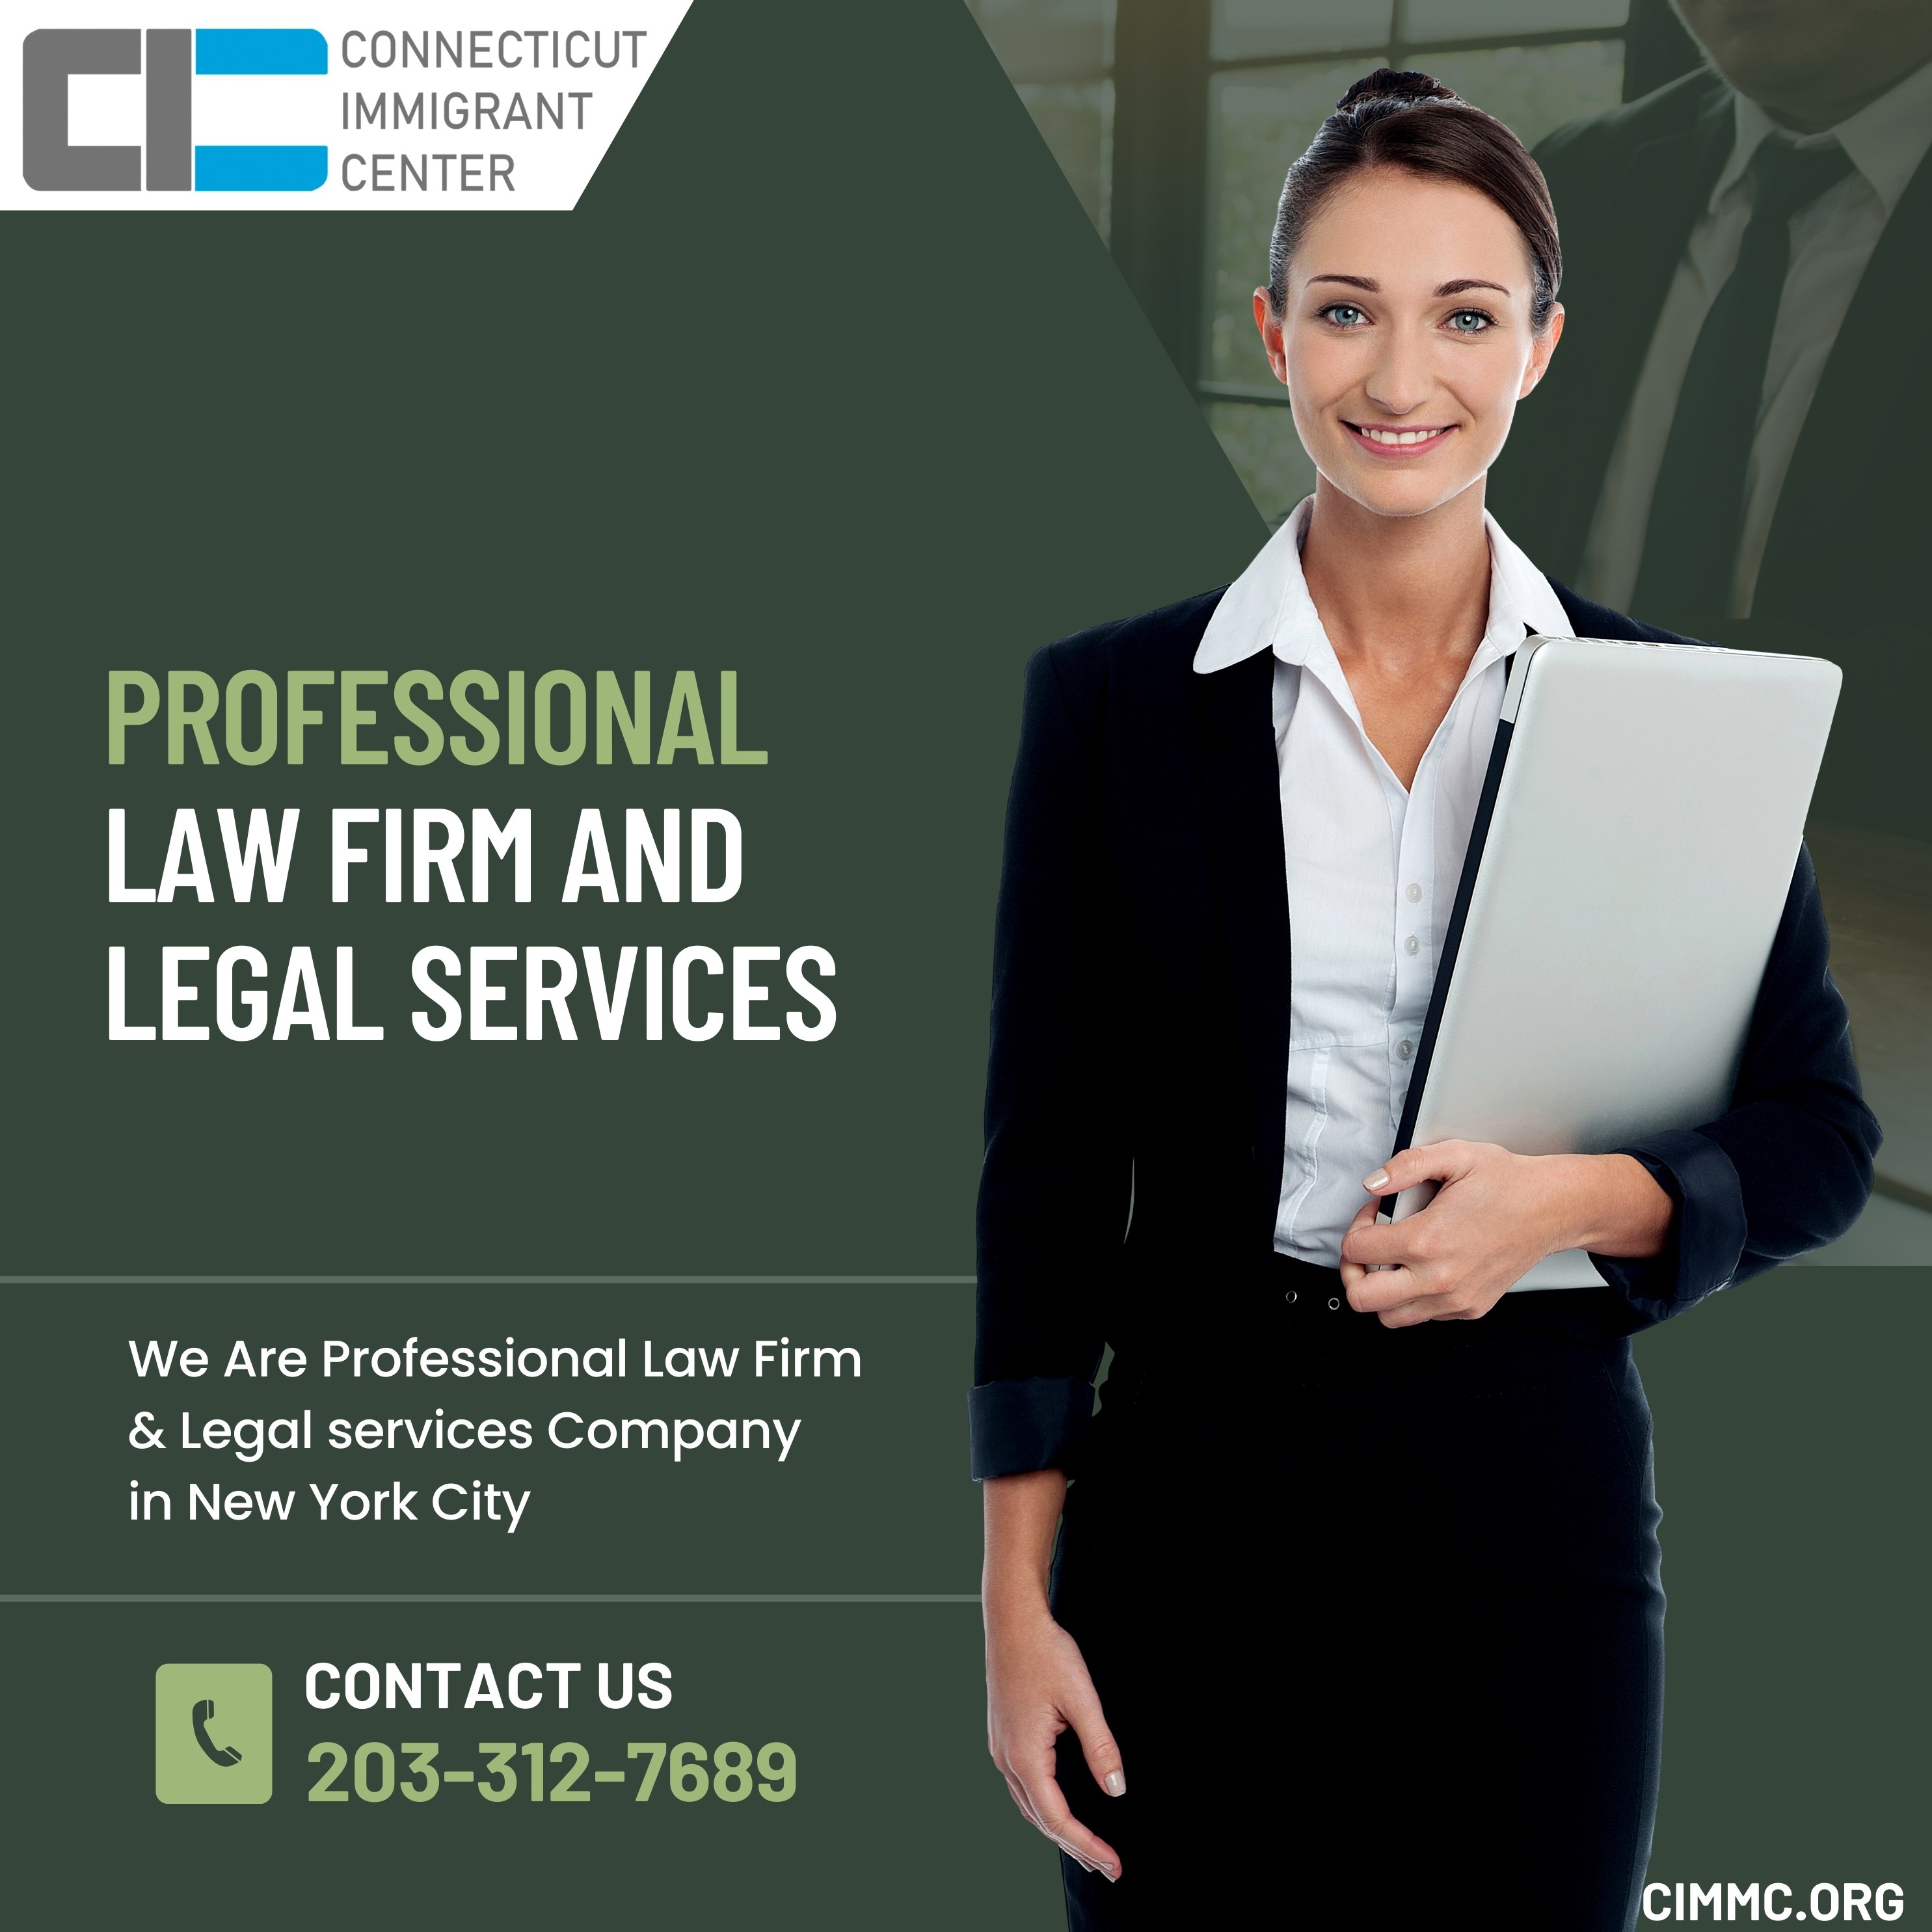 Immigration Defense Lawyer - Connecticut - Hartford ID1514400 3